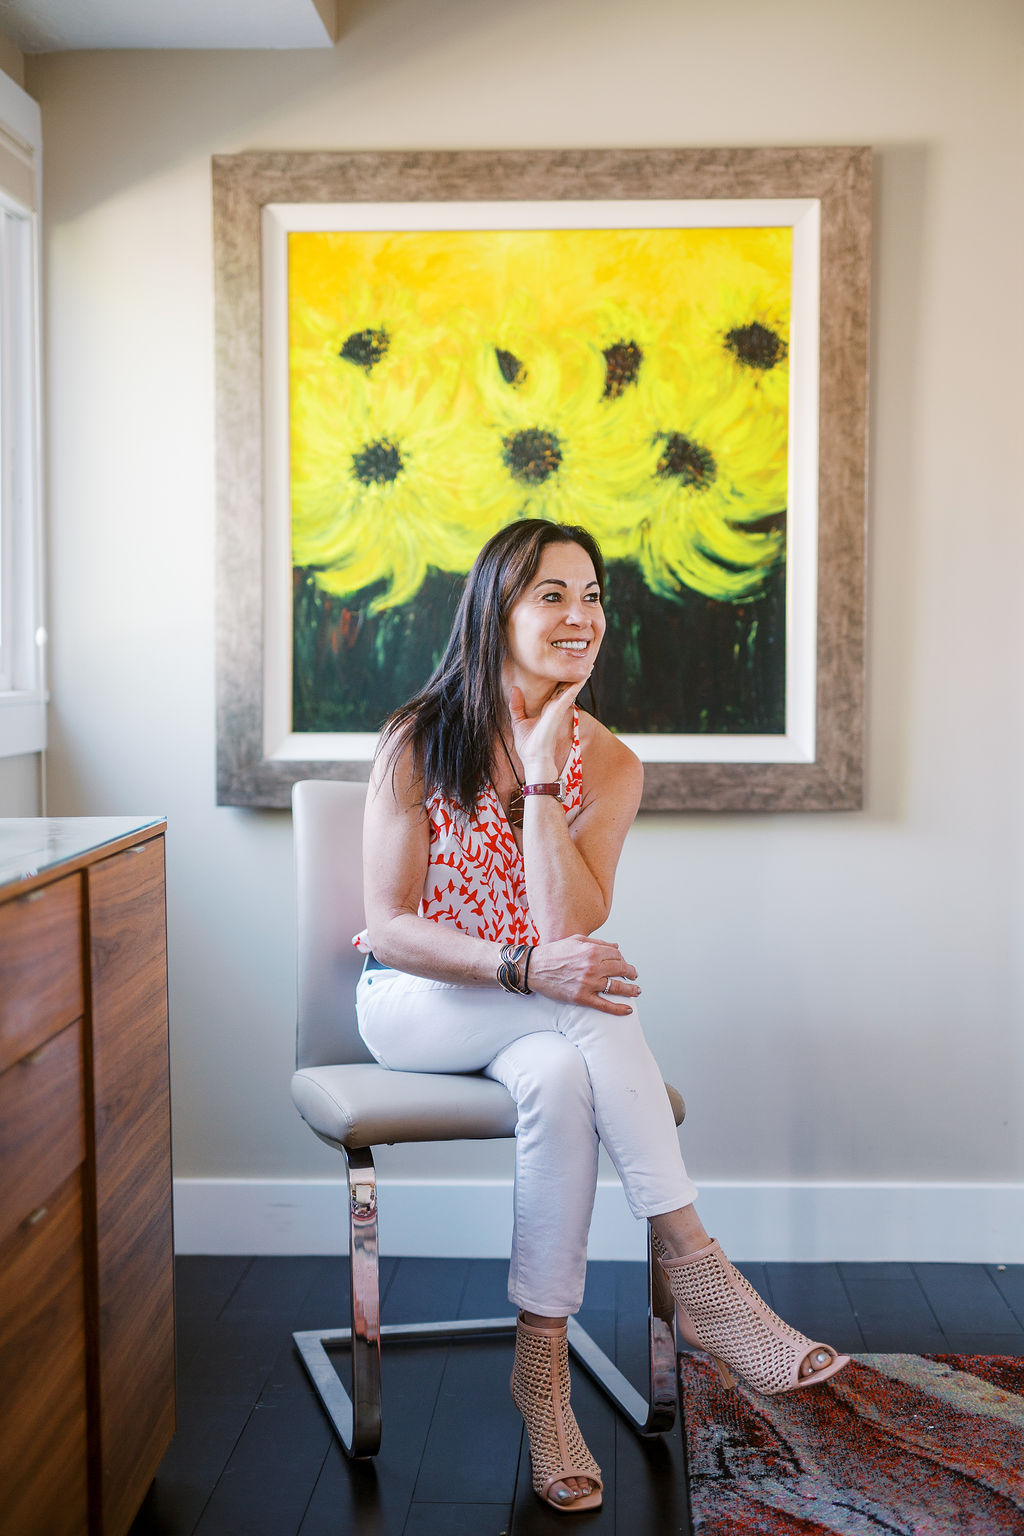 a woman with dark hair and white pants smiles in front of a painting of sunflowers